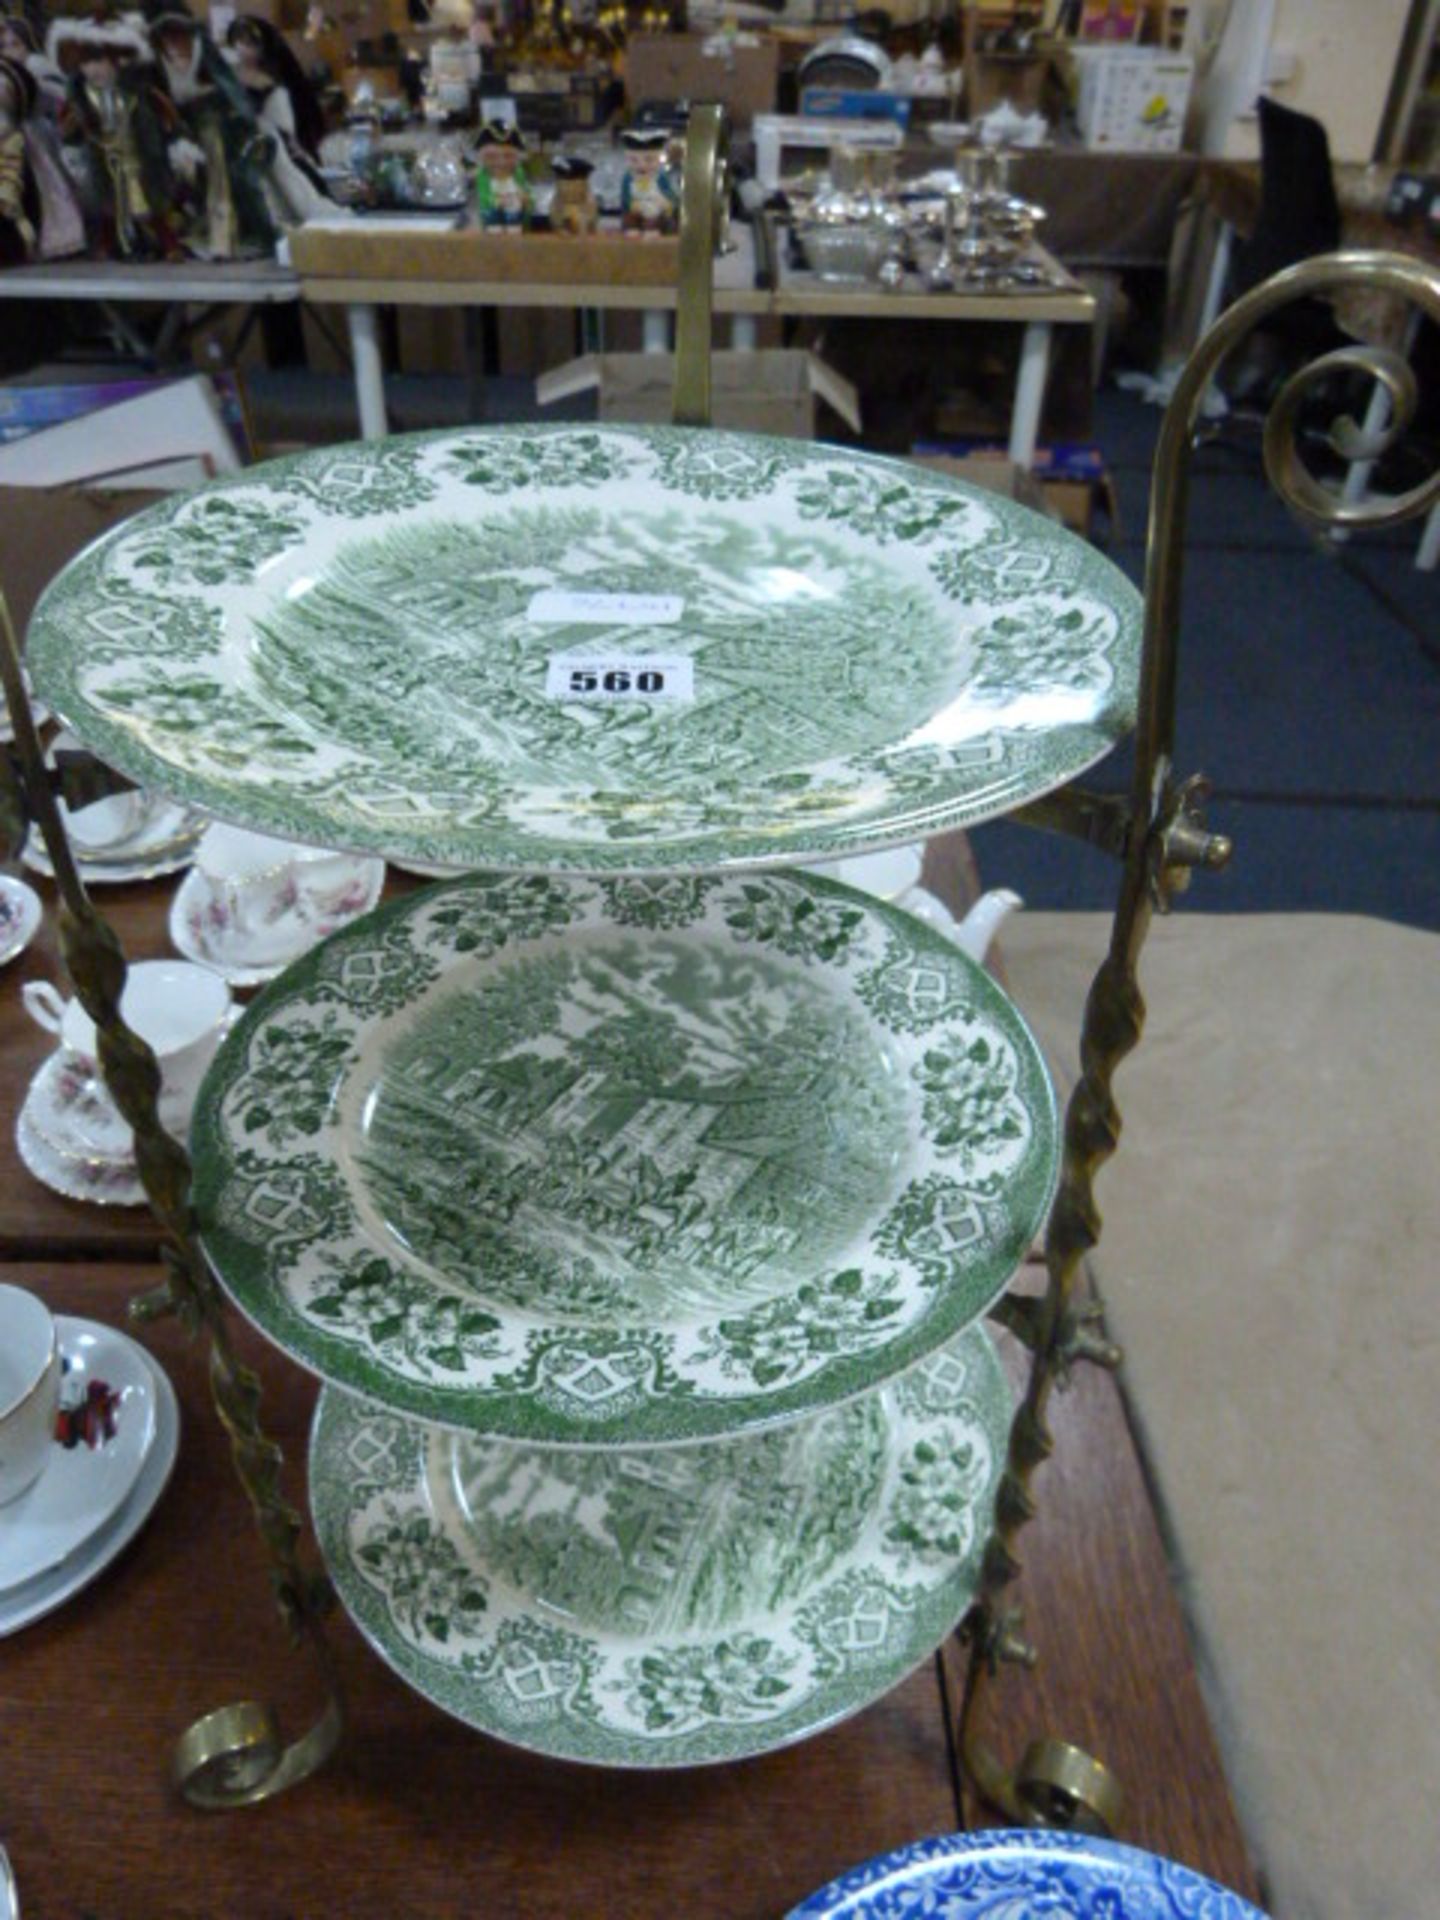 Edwardian Glass Cake Stand with Plates